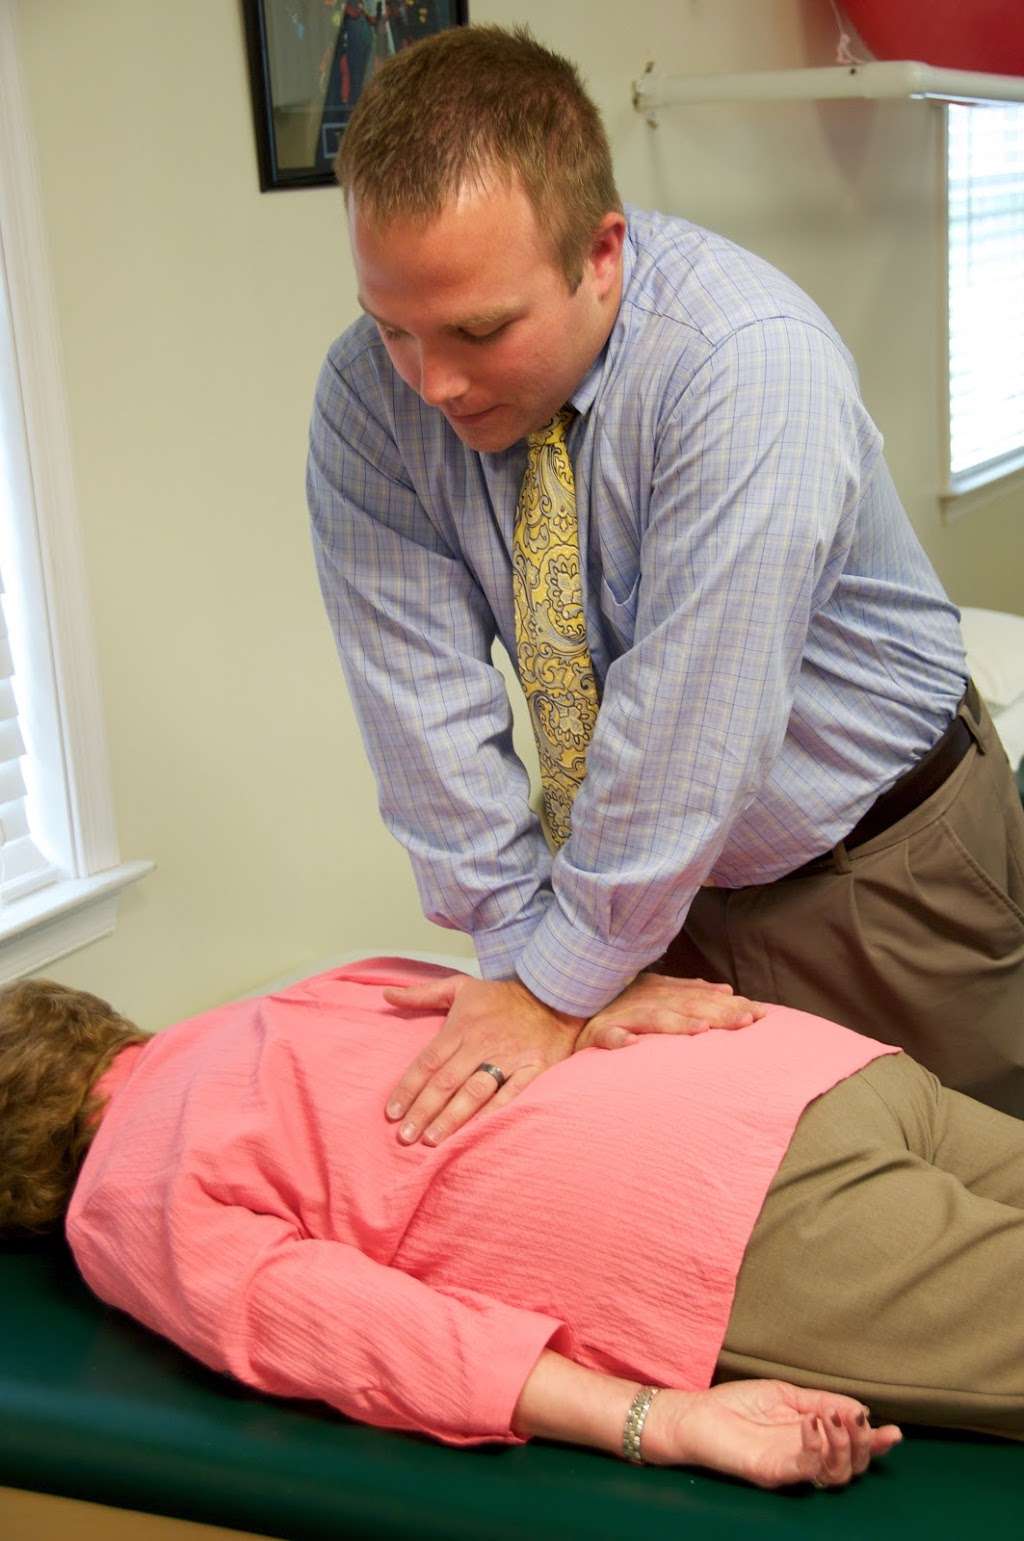 Mishock Physical Therapy & Associates | Lower Level, 3887 W Skippack Pike, Skippack, PA 19474 | Phone: (610) 584-1400